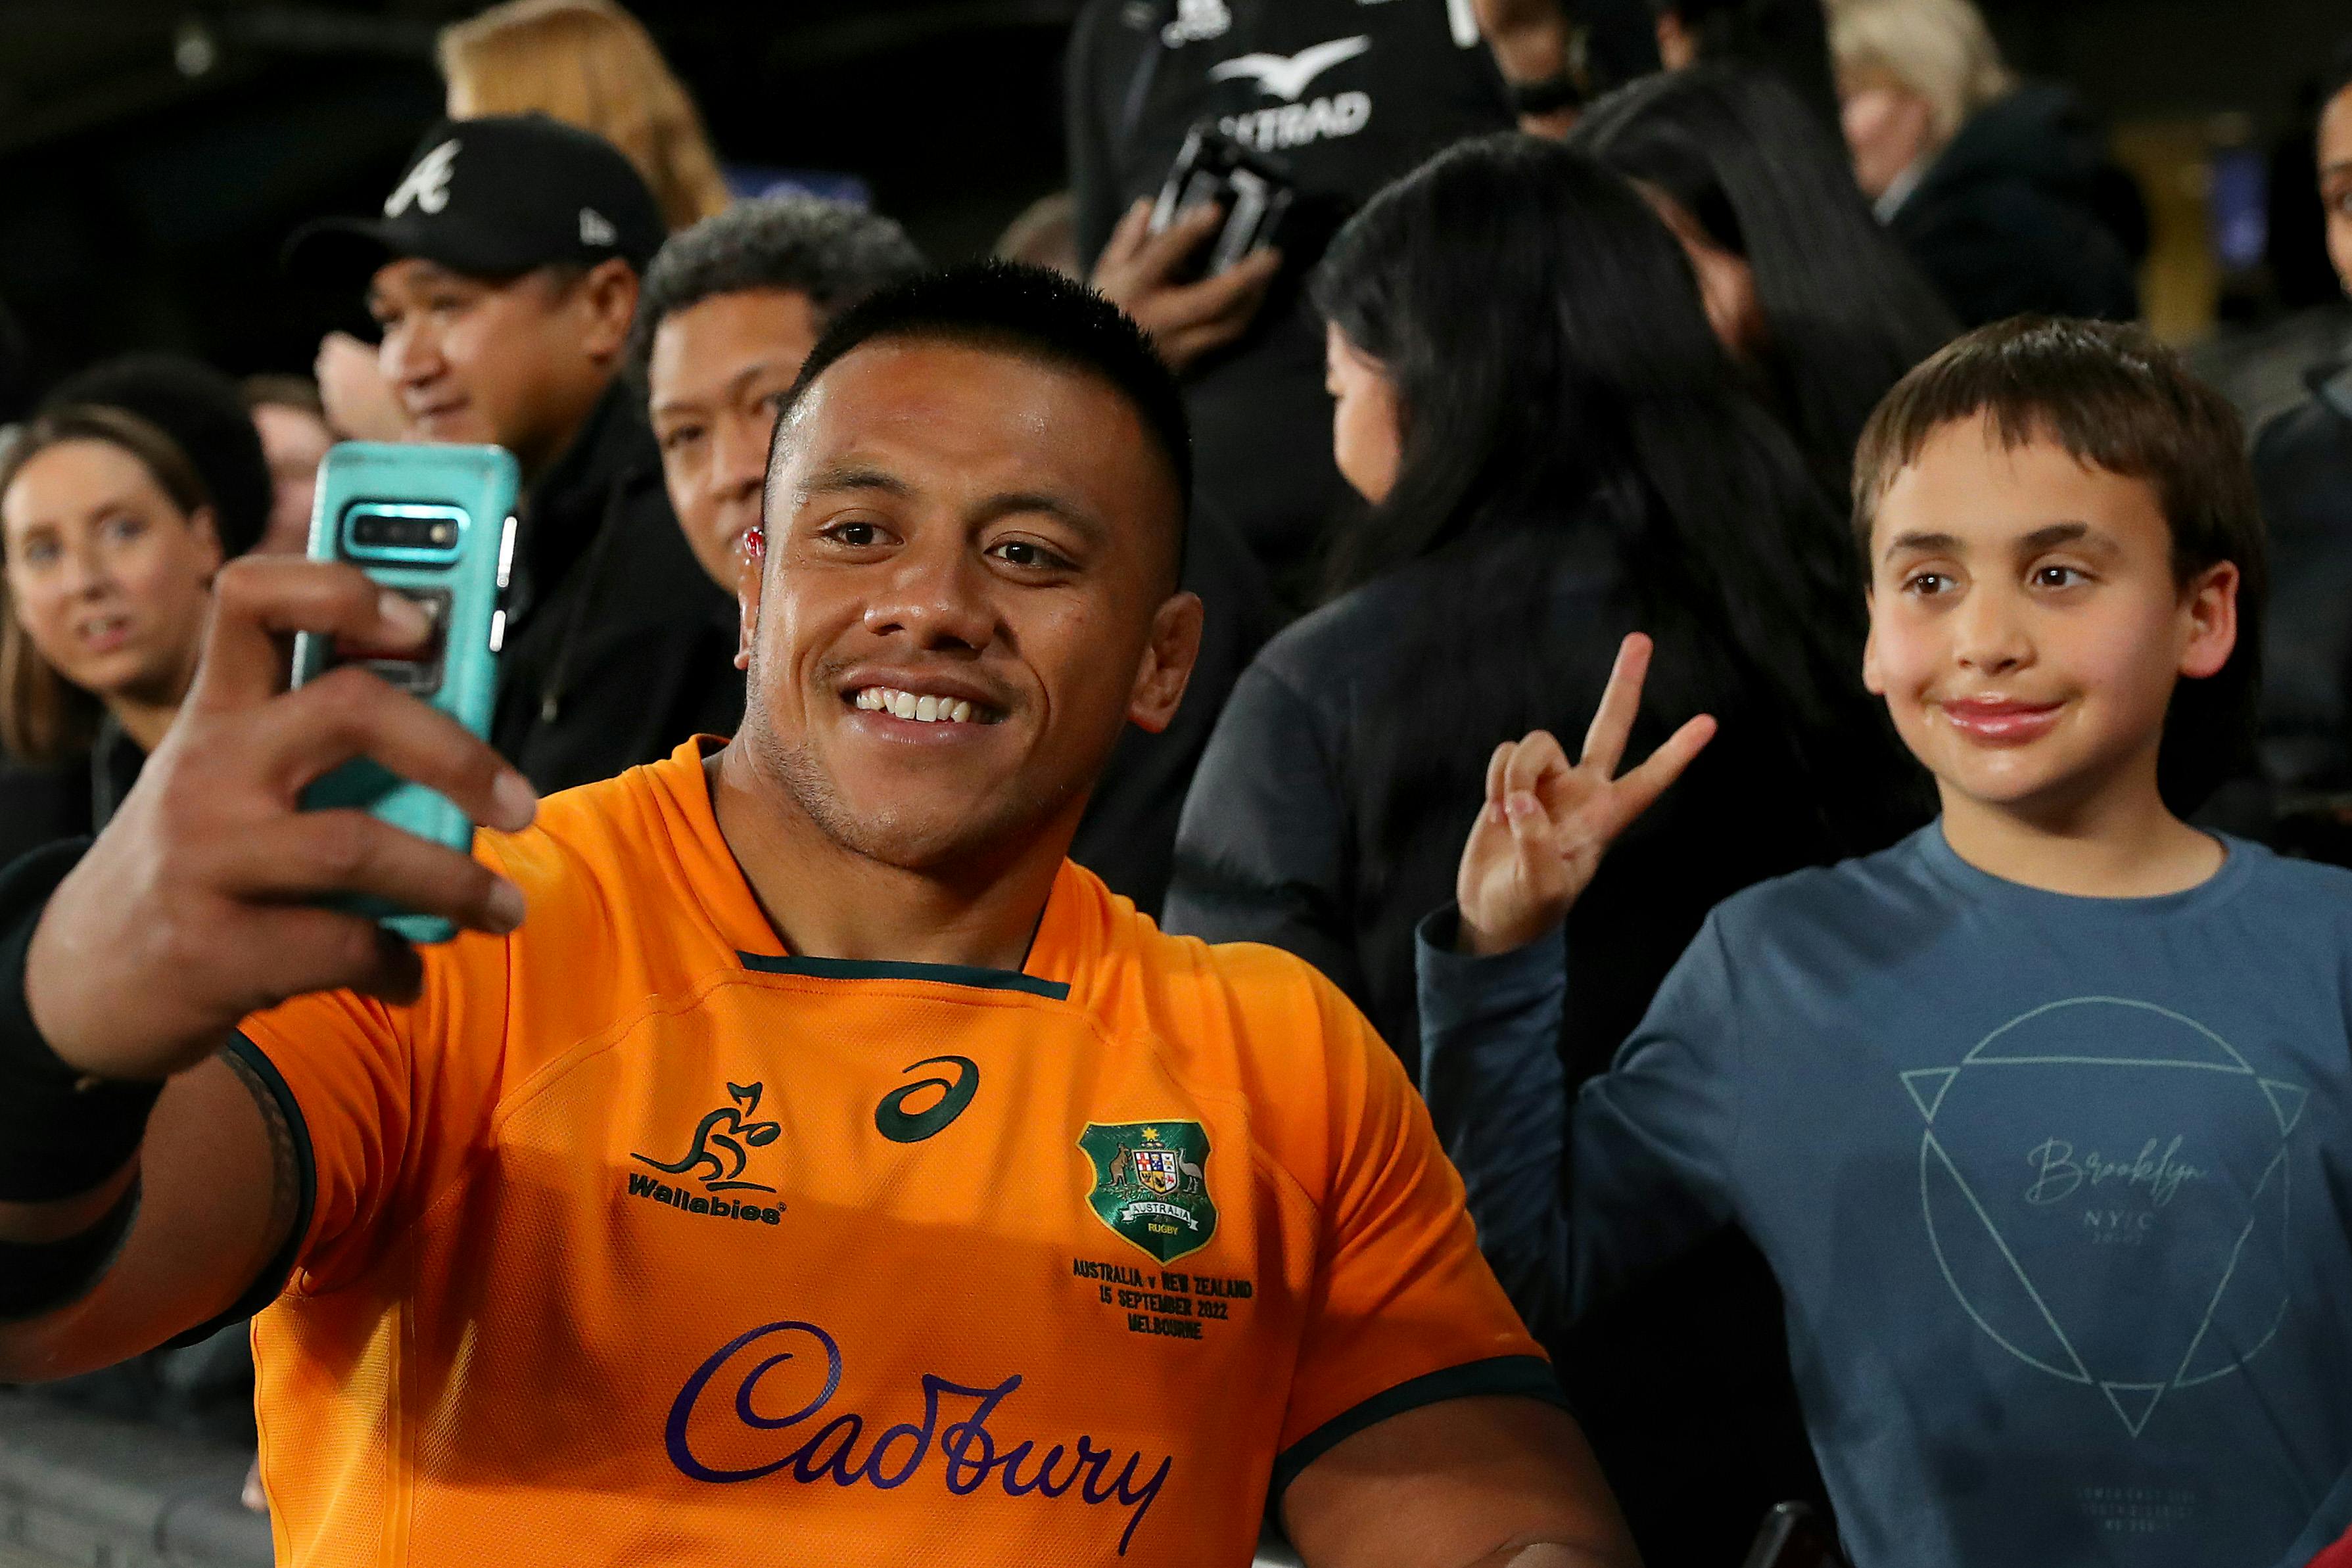 Rugby Australia and the ACT Brumbies are thrilled to announce prop Allan Alaalatoa has committed his future to Australian Rugby until the end of 2027.